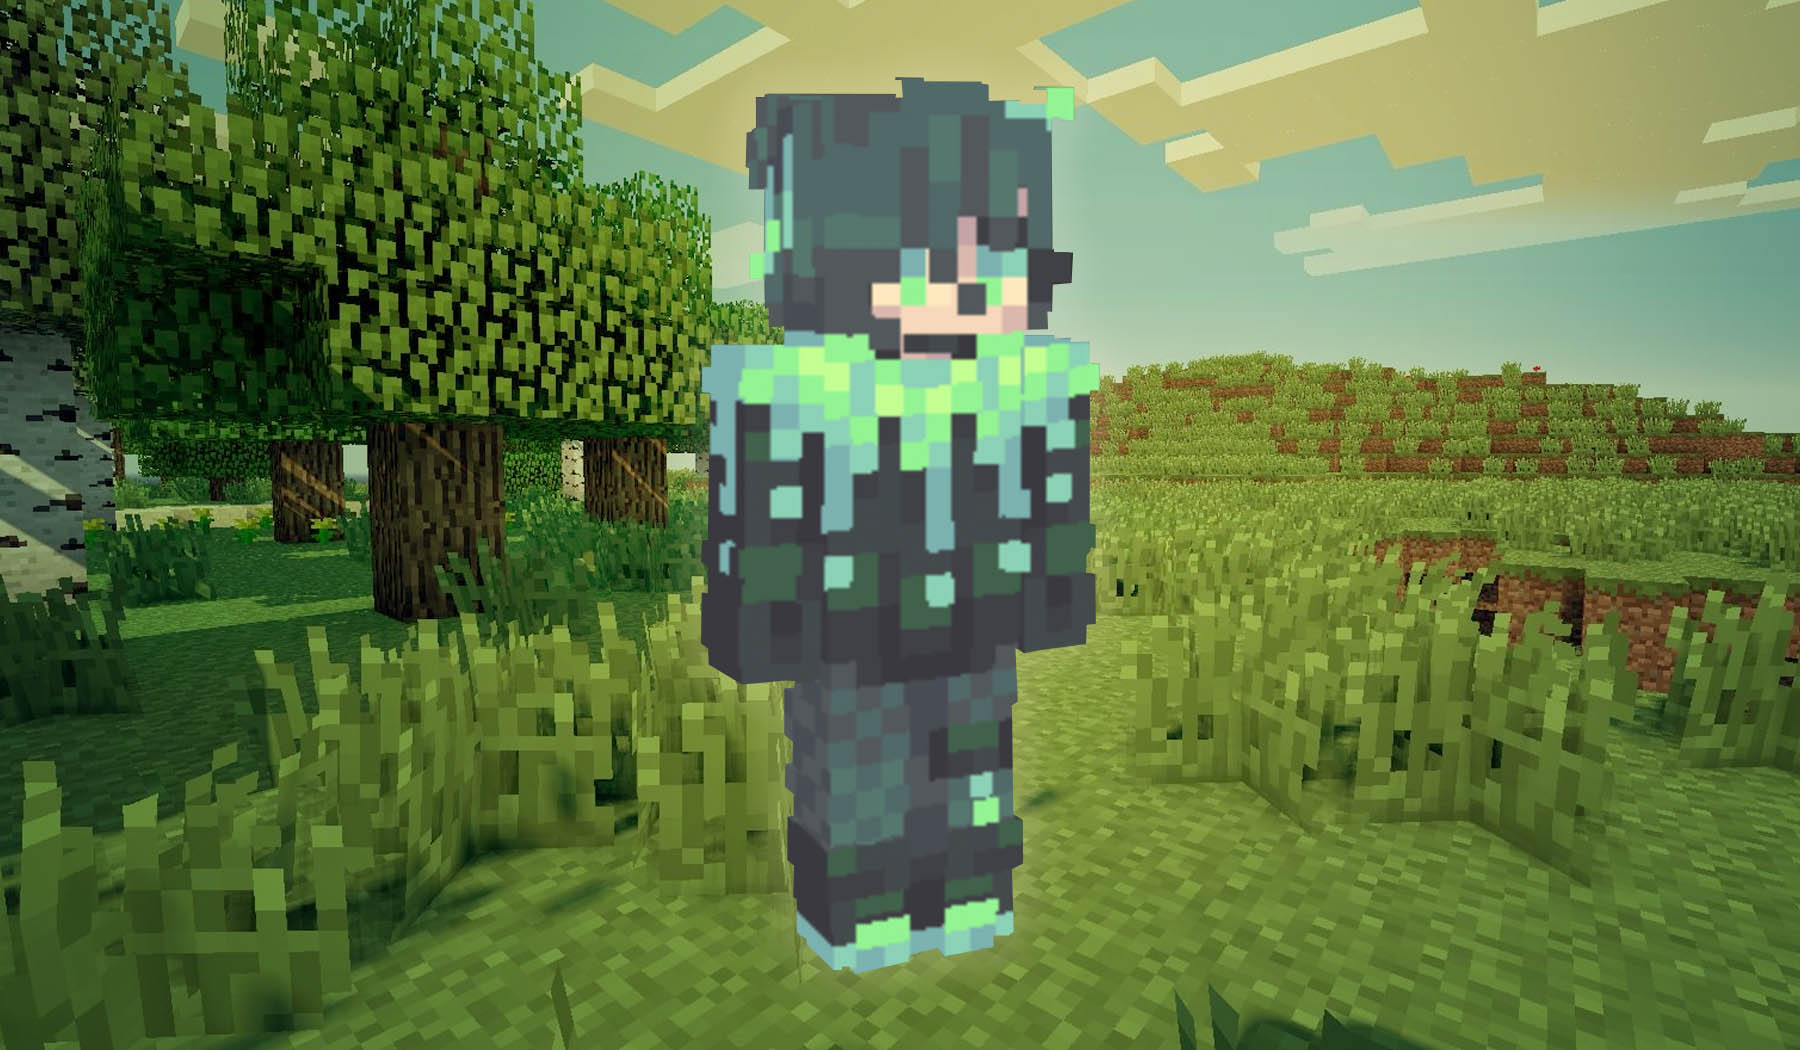 [Top 25] Best Minecraft Skins That Look Freakin' Awesome | GAMERS DECIDE